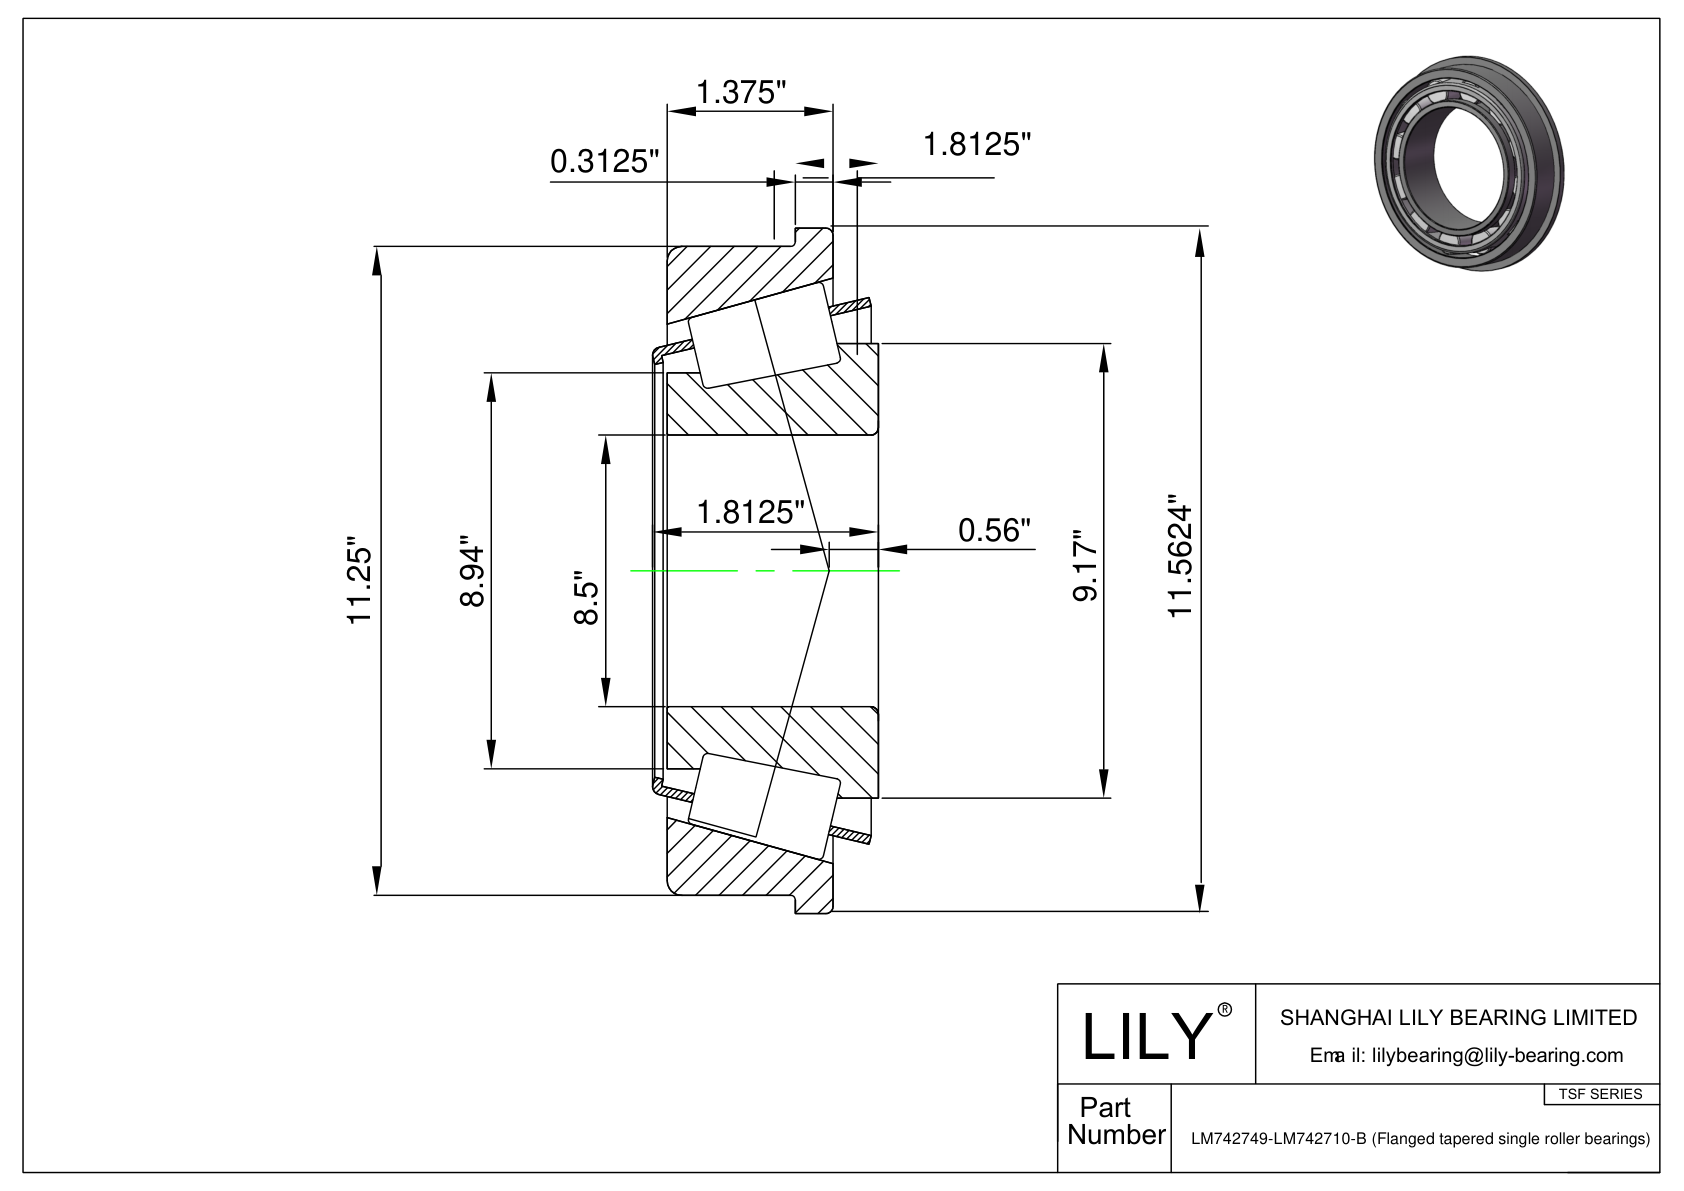 LM742749-LM742710-B TSF (Tapered Single Roller Bearings with Flange) (Imperial) cad drawing